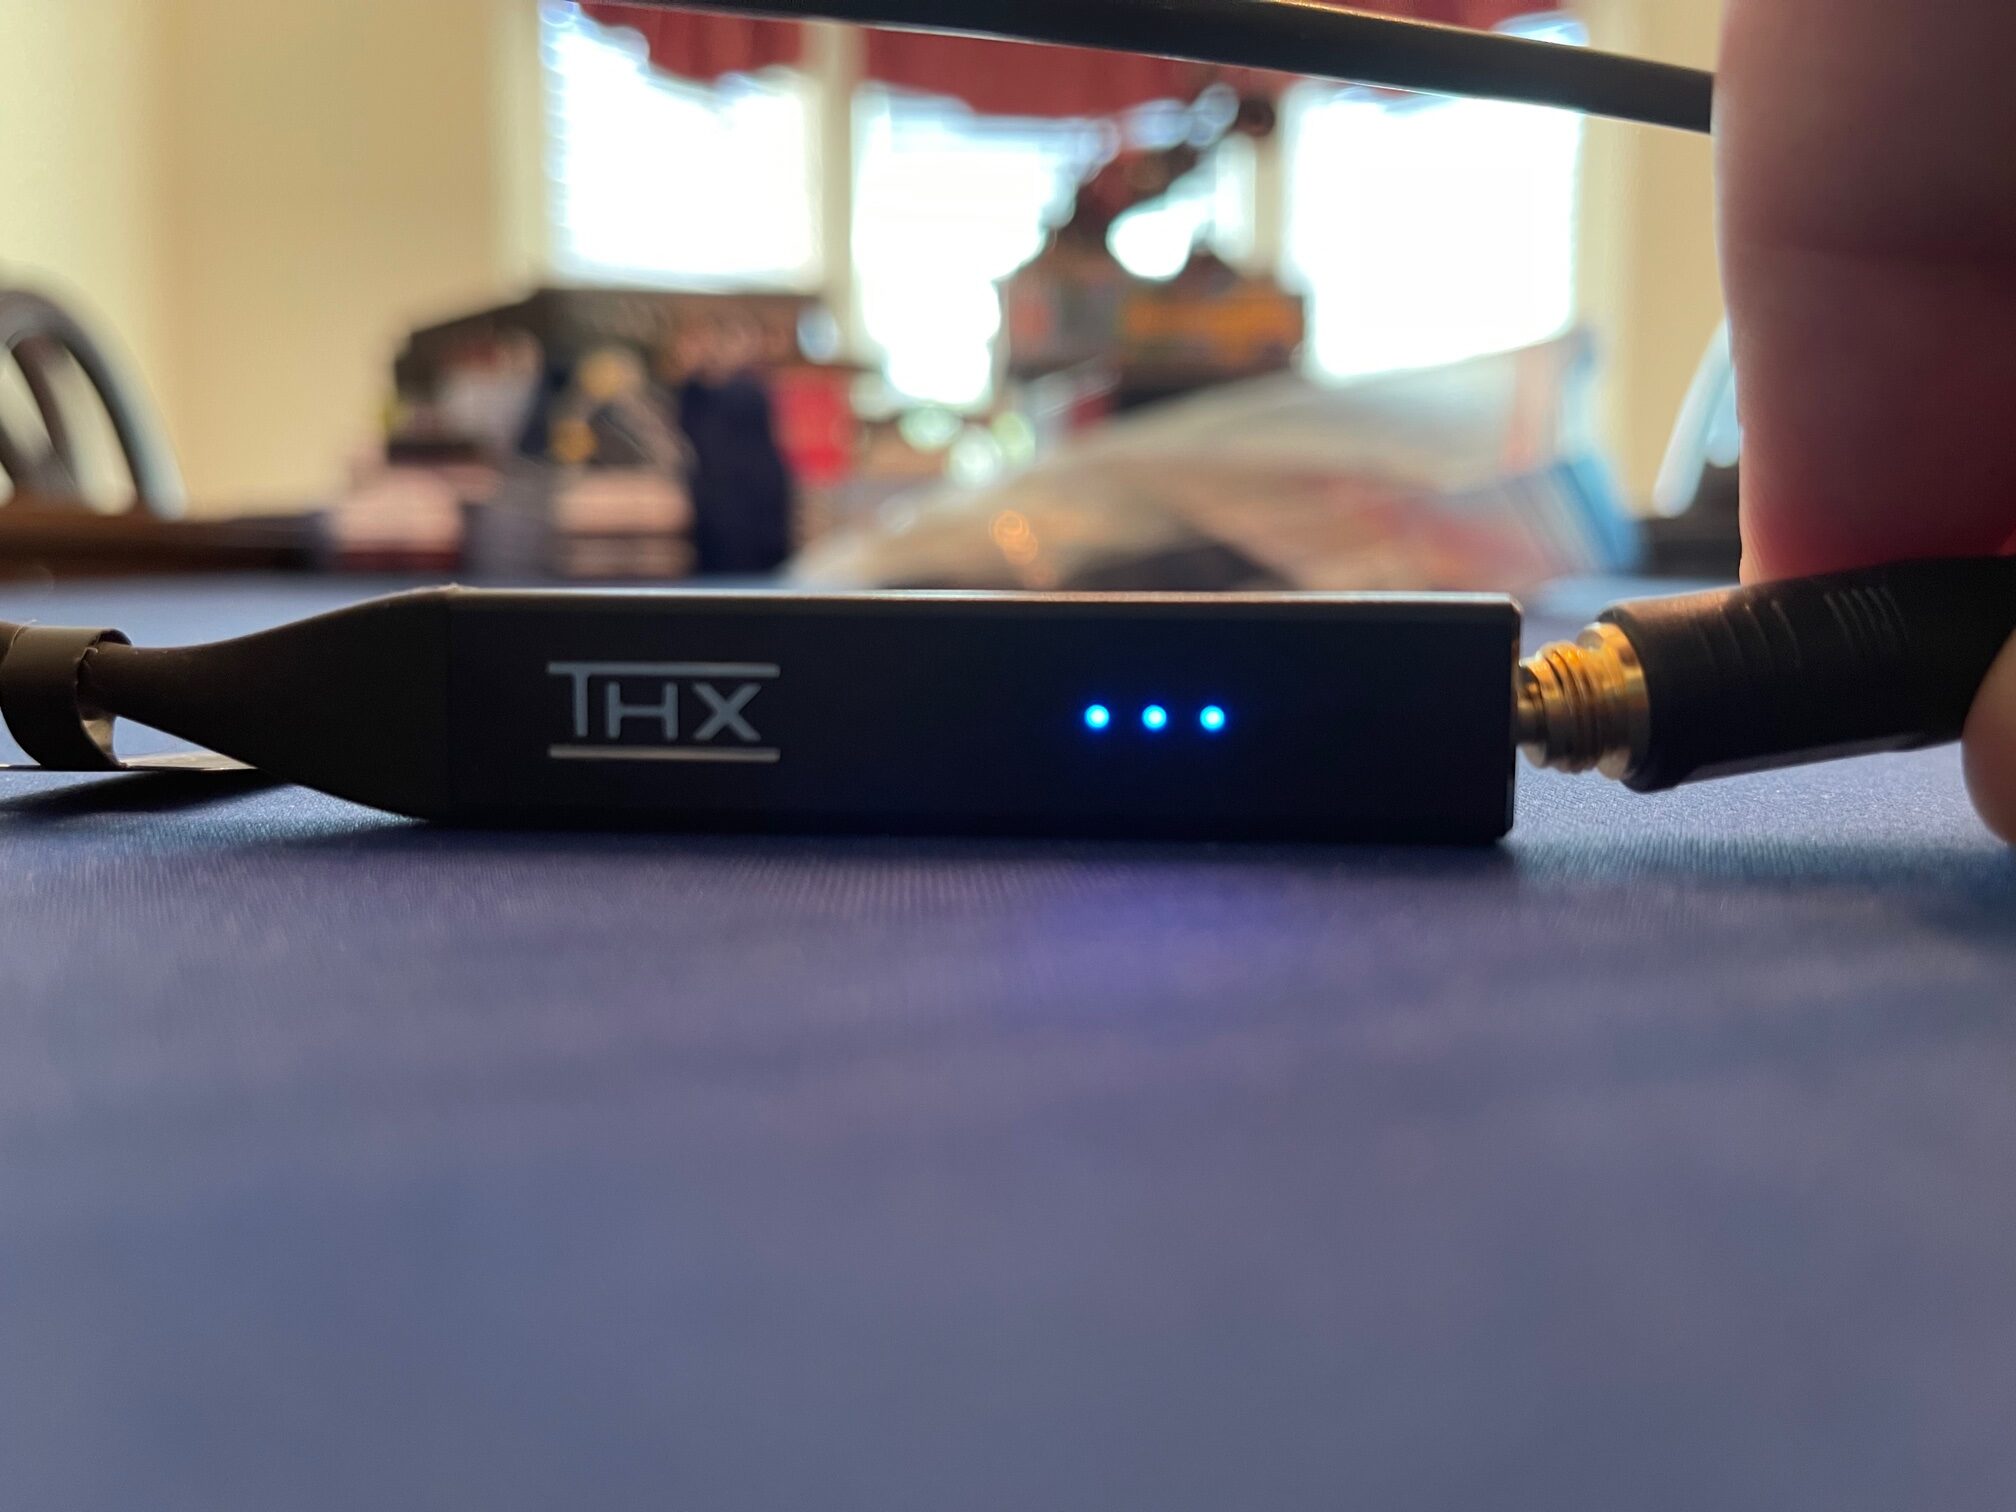 THX's Onyx is a tiny USB-C headphone DAC that supports master-quality audio